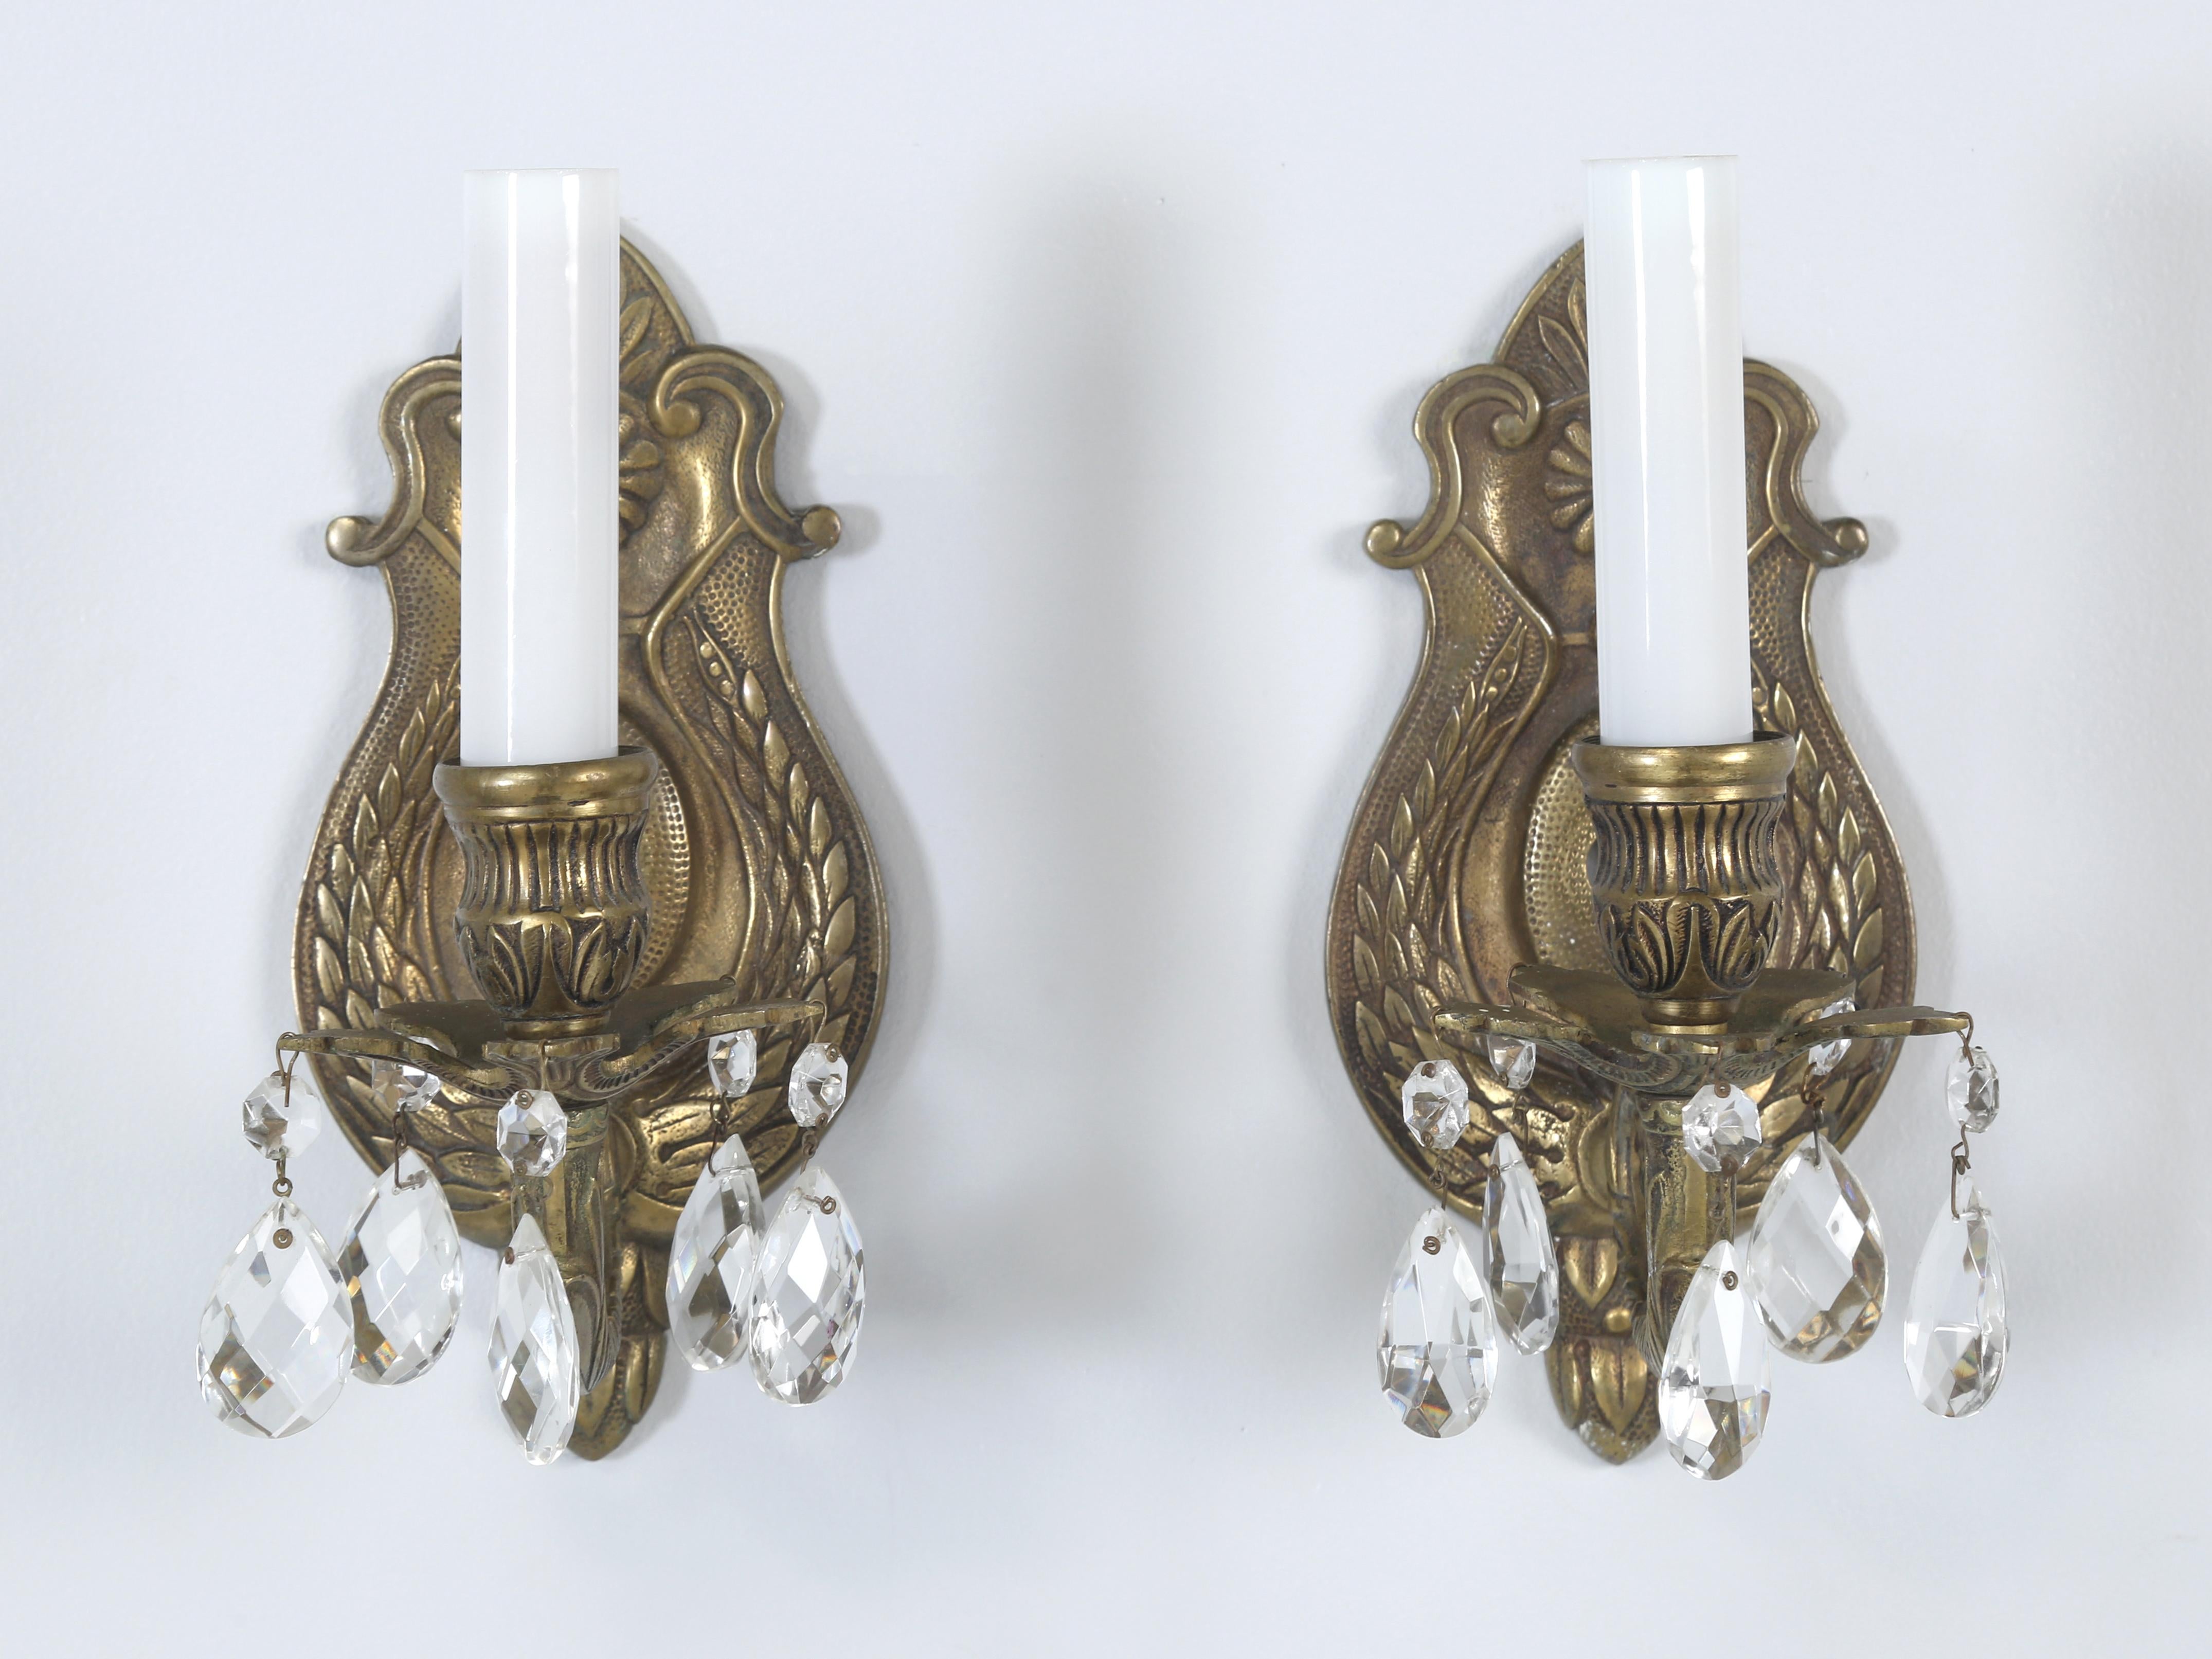 Pair of hand-made solid brass sconces removed from The John Rogerson Montgomery House, a residence designed by architect Howard Van Doren Shaw in Illinois. The home is a Georgian Revival architecture blended with Arts & Crafts details and was